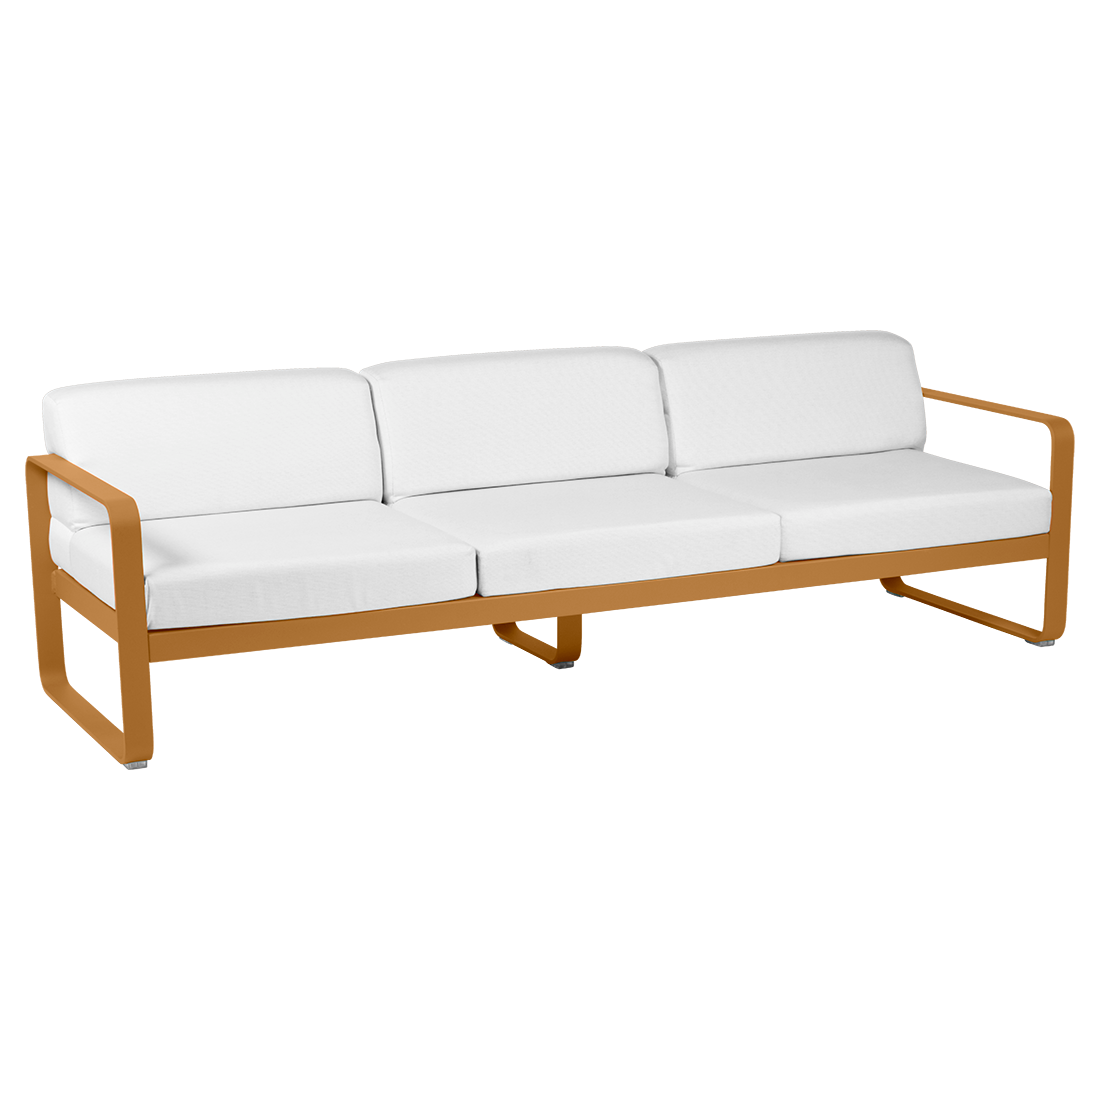 BELLEVIE 3-SEATER / OFF-WHITE CUSHION